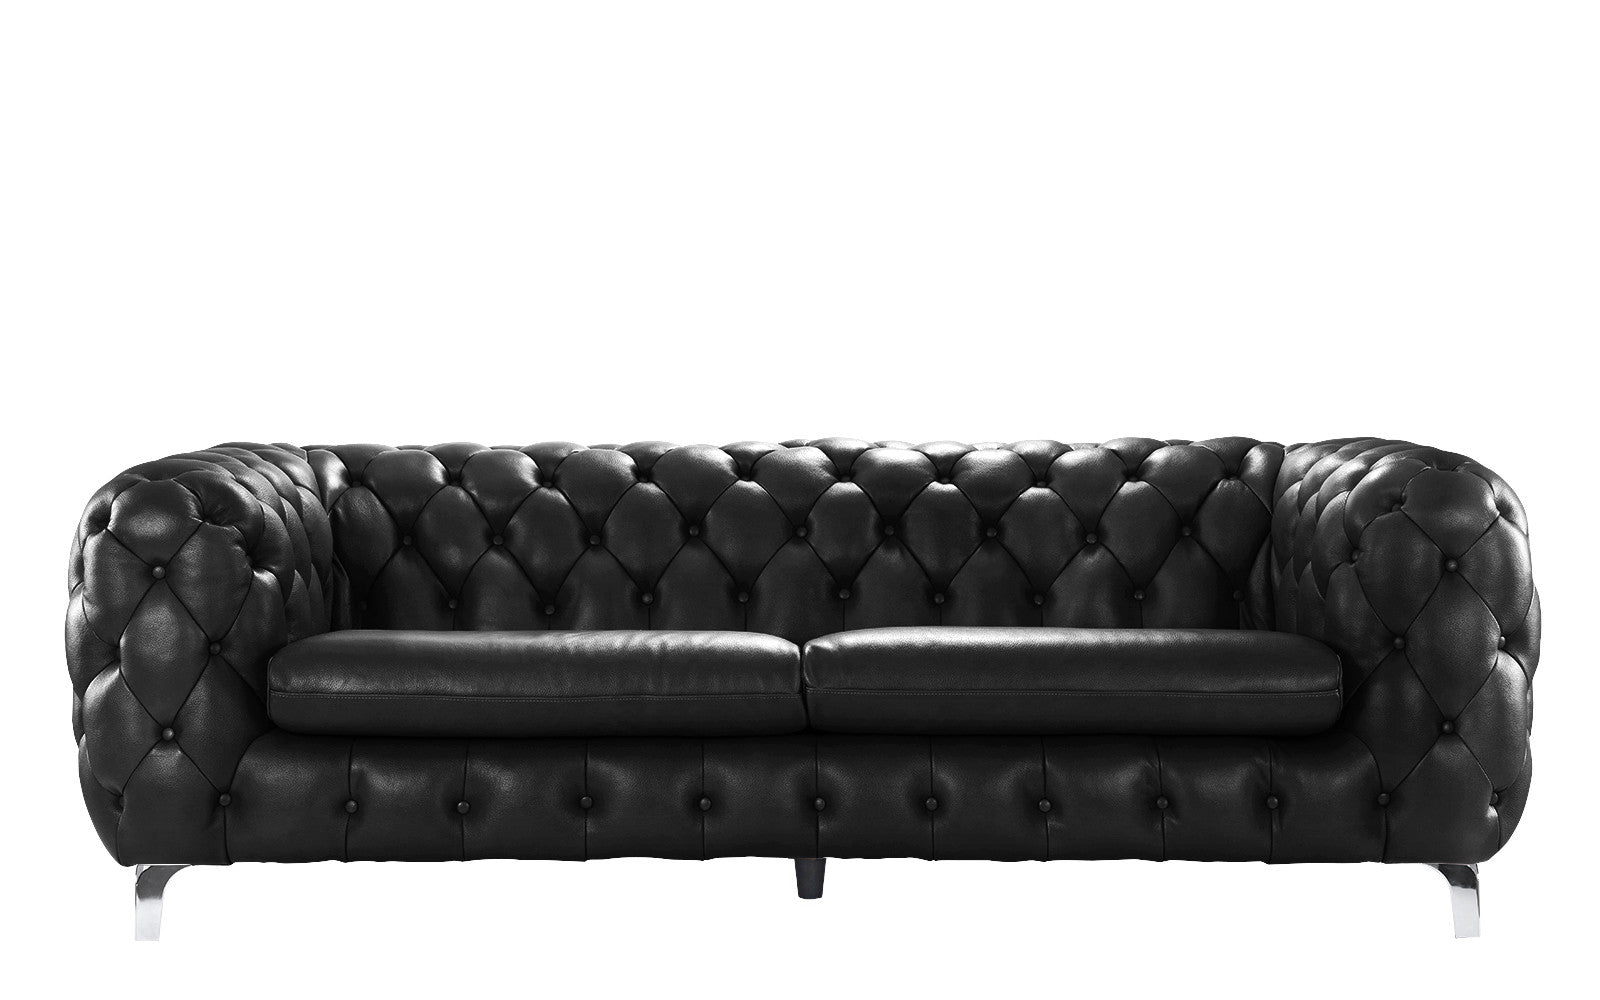 York Glamour Boudoir Tufted Leather Sofa with Built-In Shelves